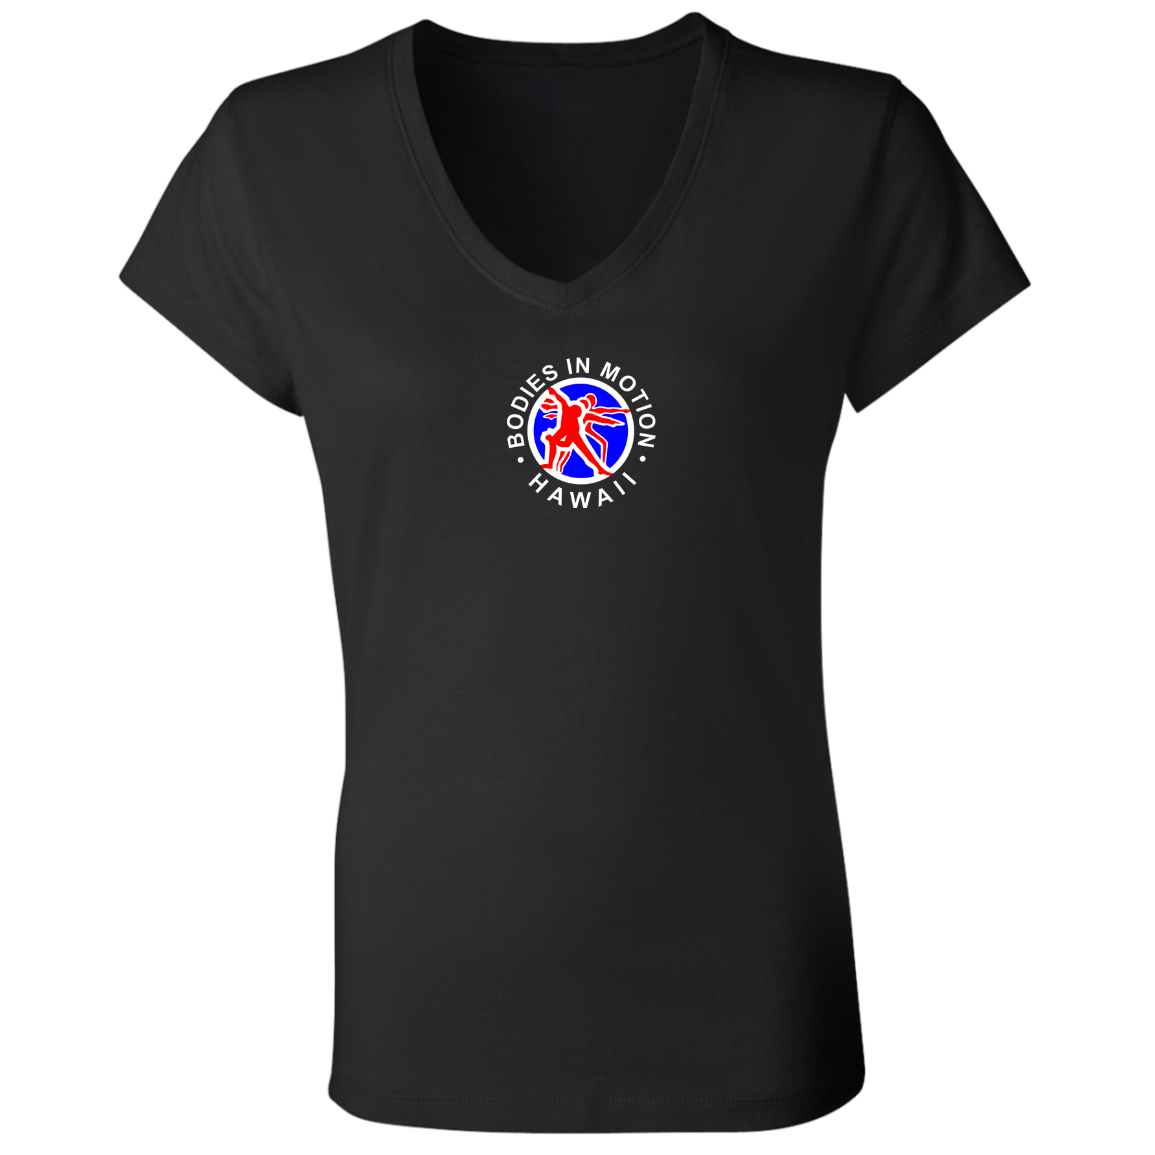 Bodies in Motion Ladies' Jersey V-Neck T-Shirt